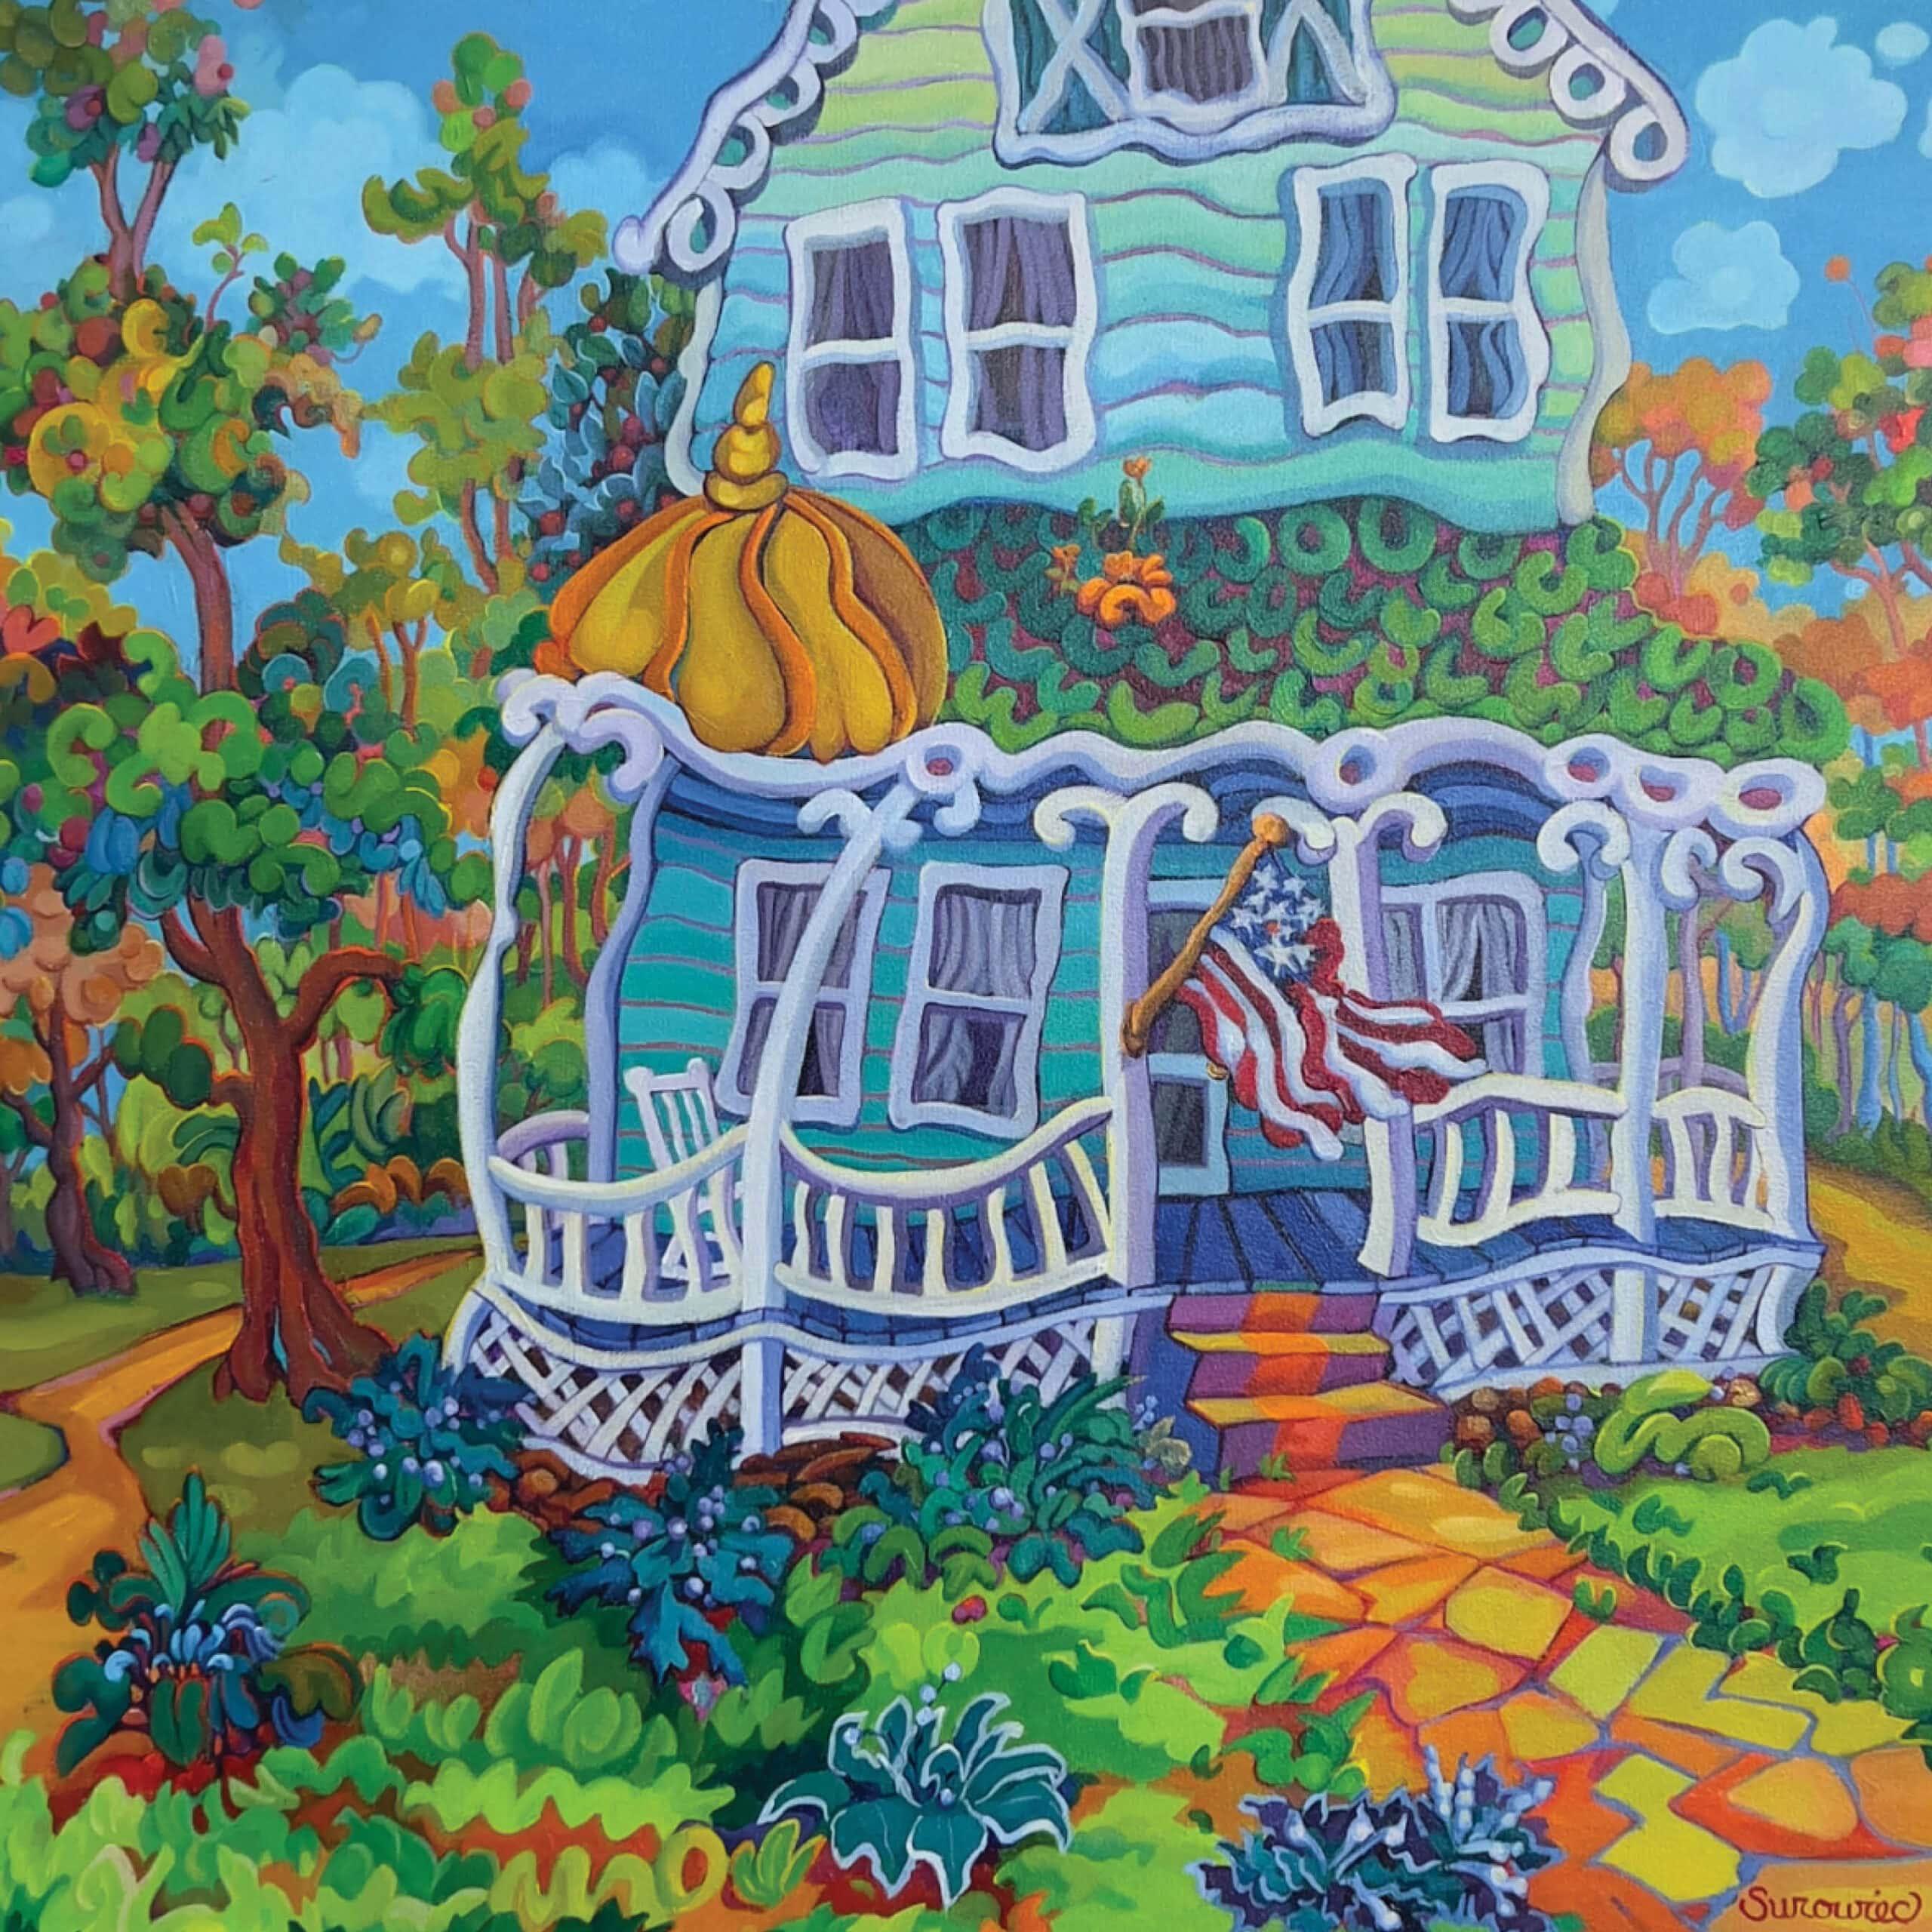 An acrylic painting of a colonial house with a wrap around porch, American flag and garden by Judith Surowiec.